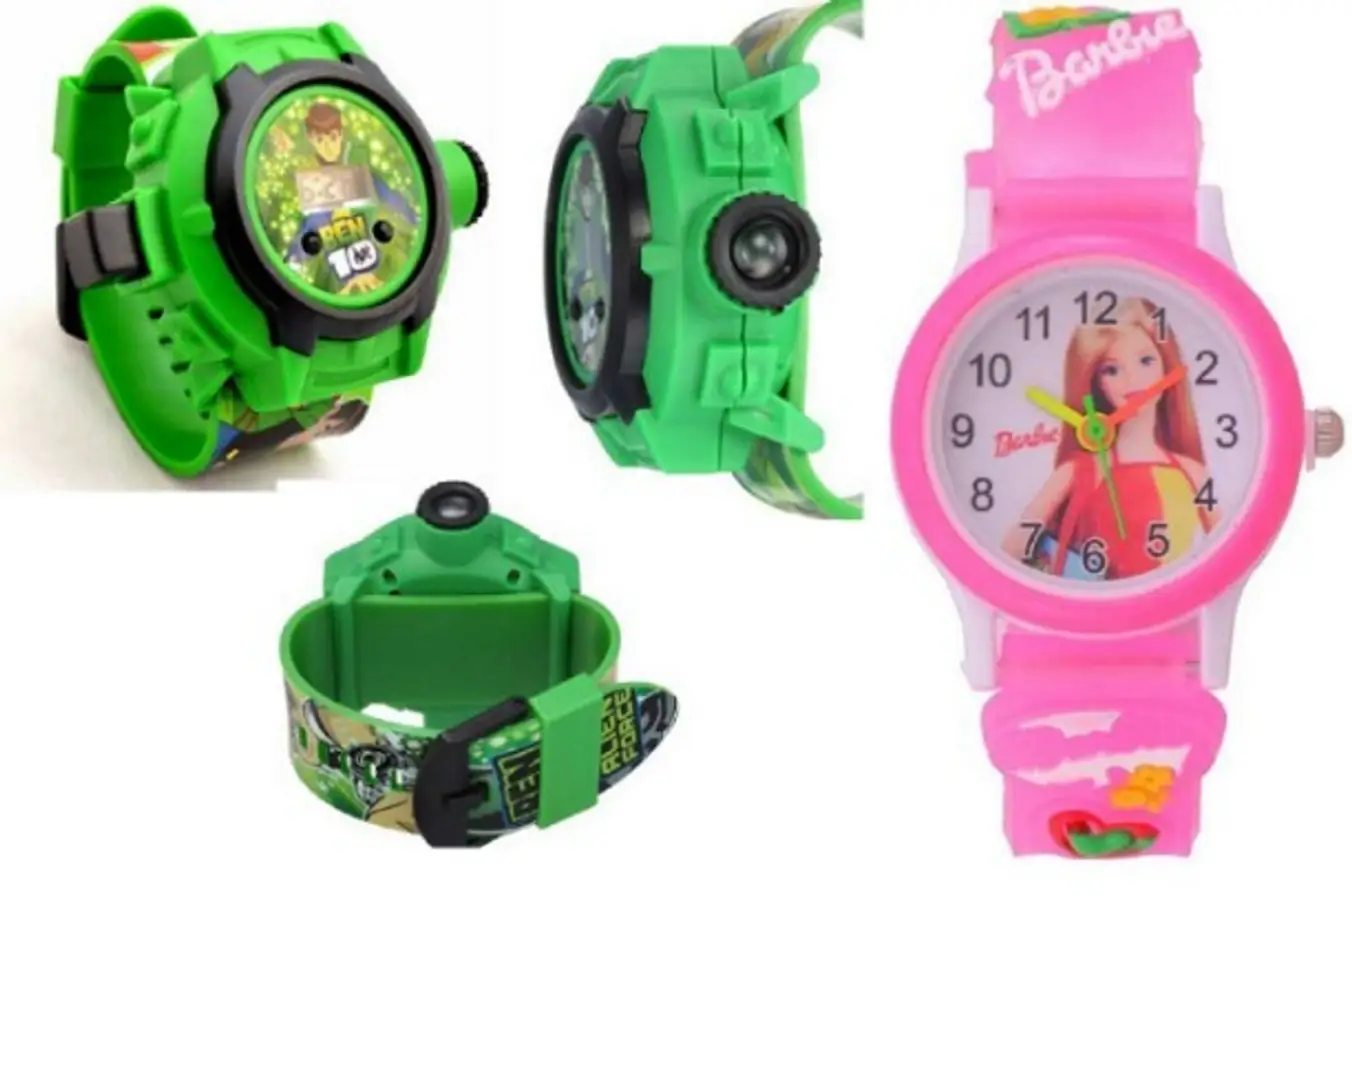 Amazon.com: Honsy Kids Projector Watch Toys for Ben 10 Alien Force and  Mysterious Projection Action Figures Model Toy for Kids Halloween : Toys &  Games